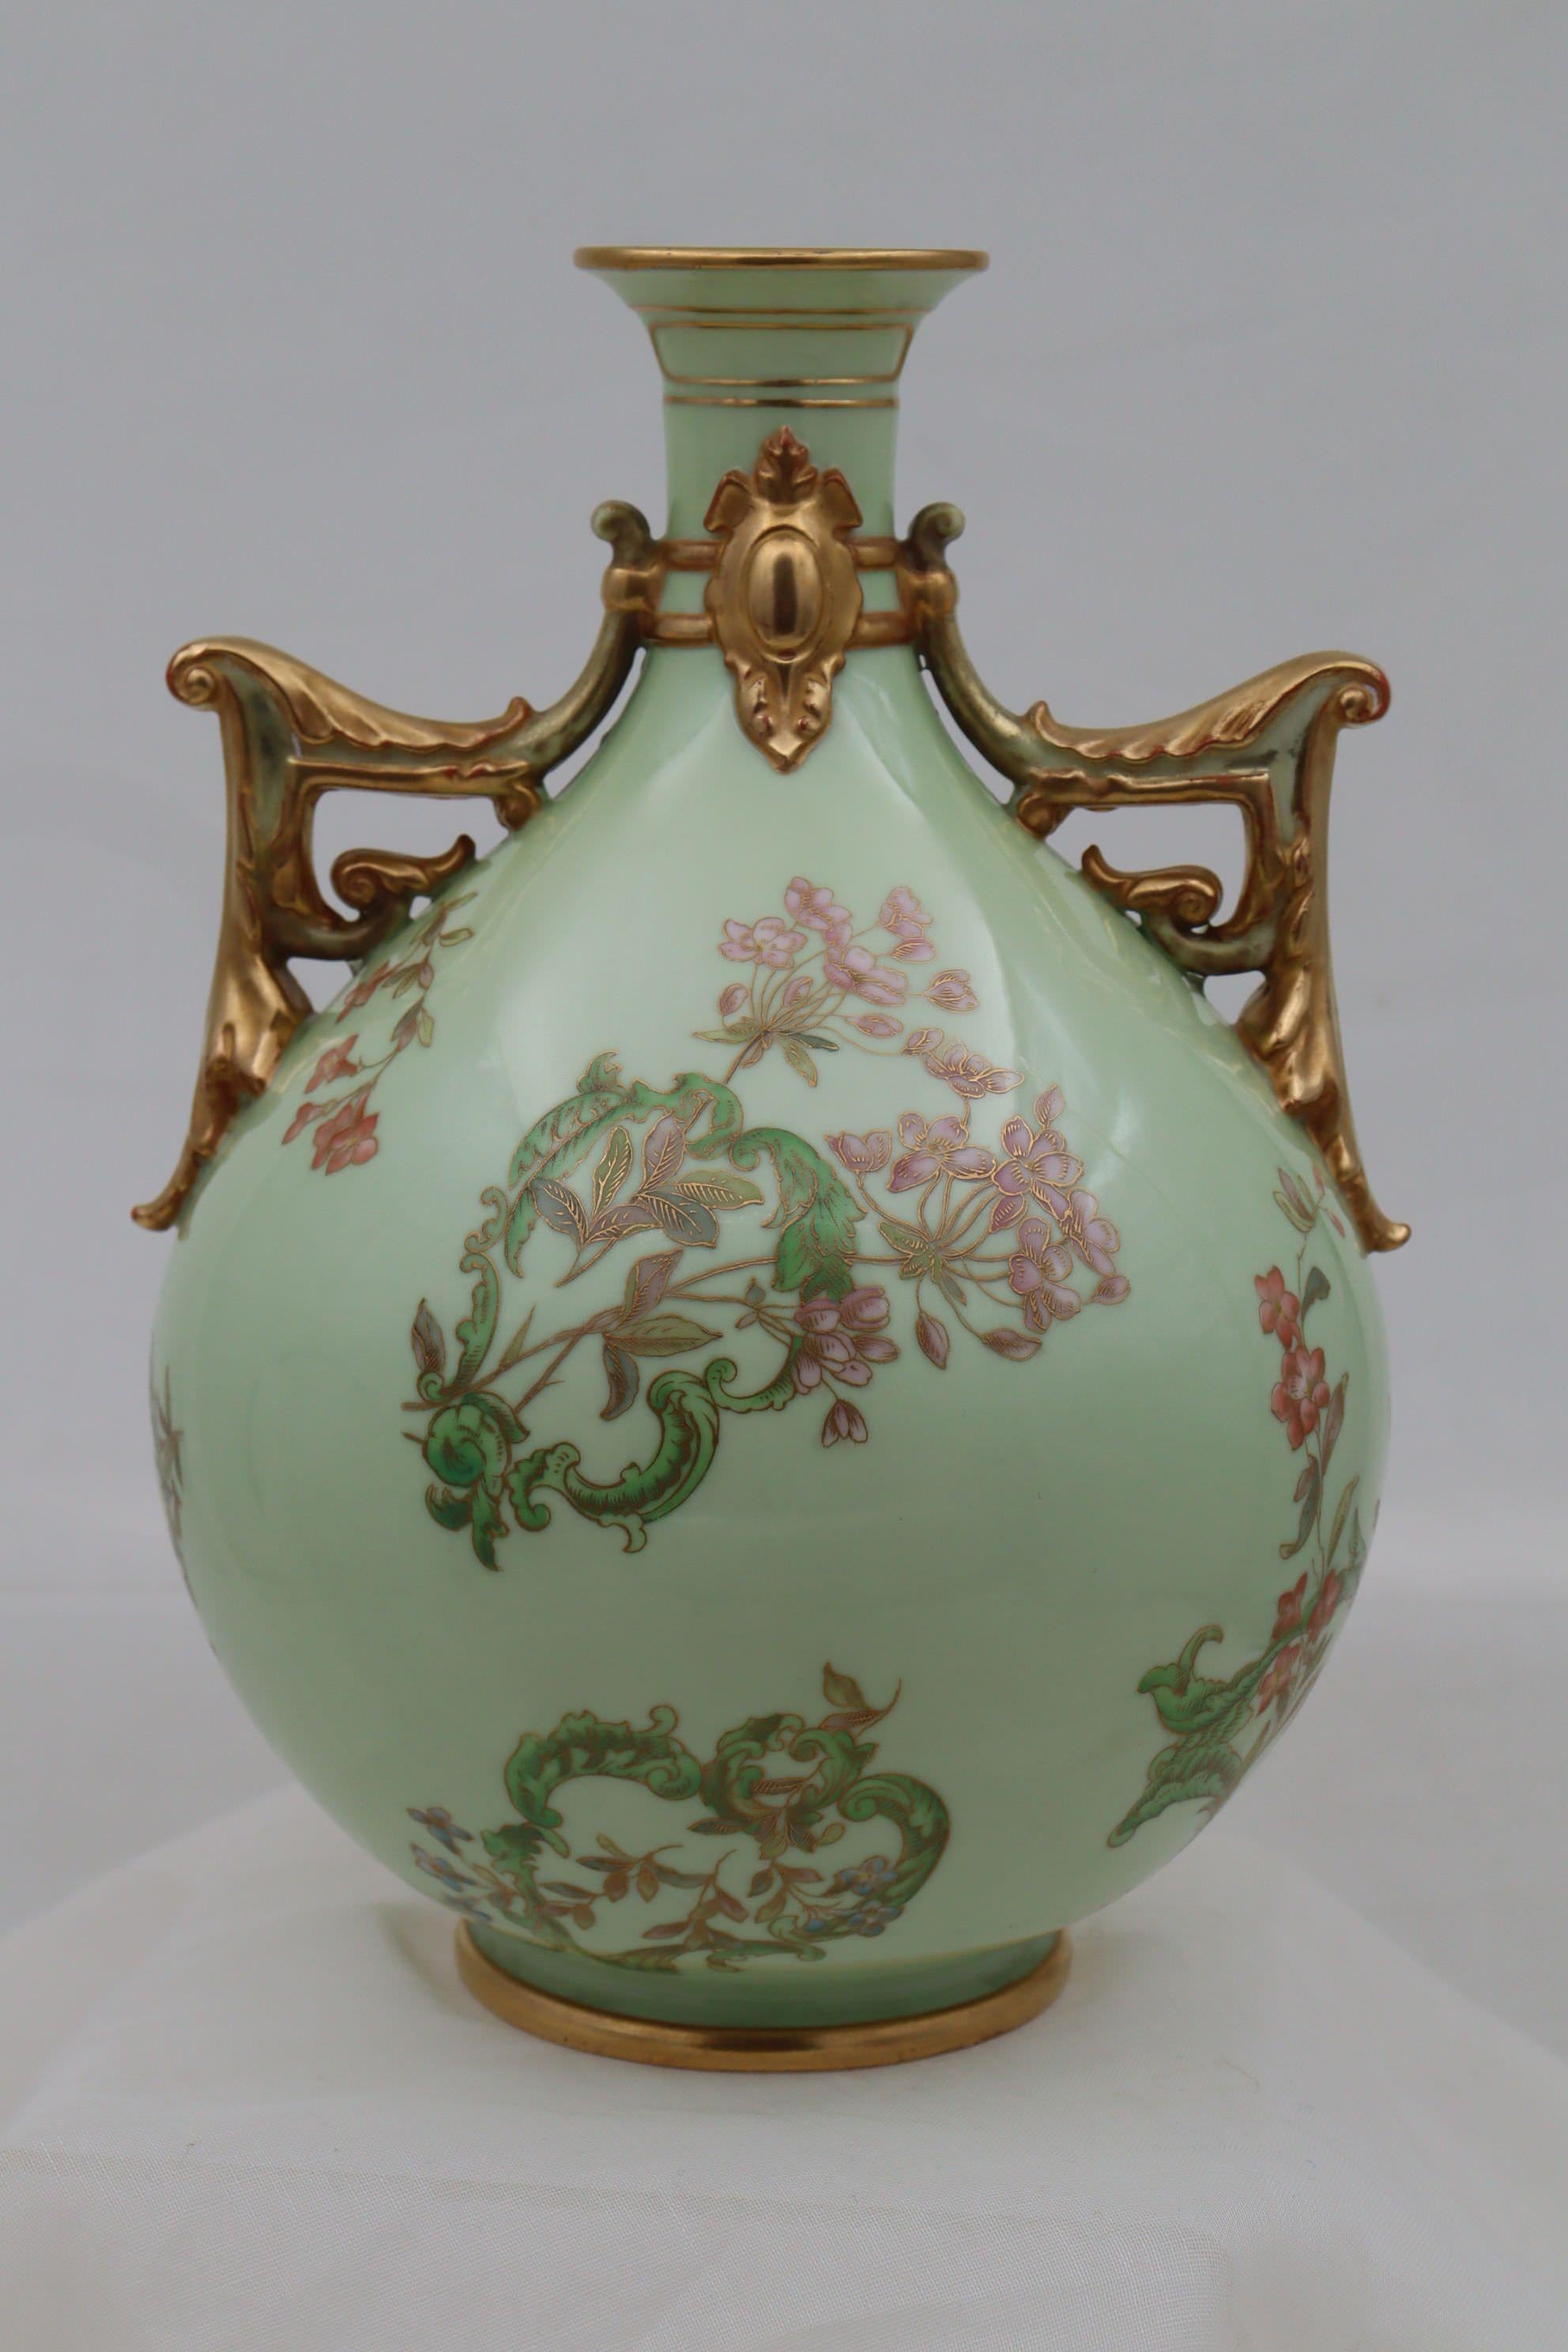 This Royal Worcester globular porcelain two handled vase features an unusual hand painted and gilded decoration which comprises a series of irregular shaped cartouches formed by stylised foliage, through which are threaded sprays of flowers, all of